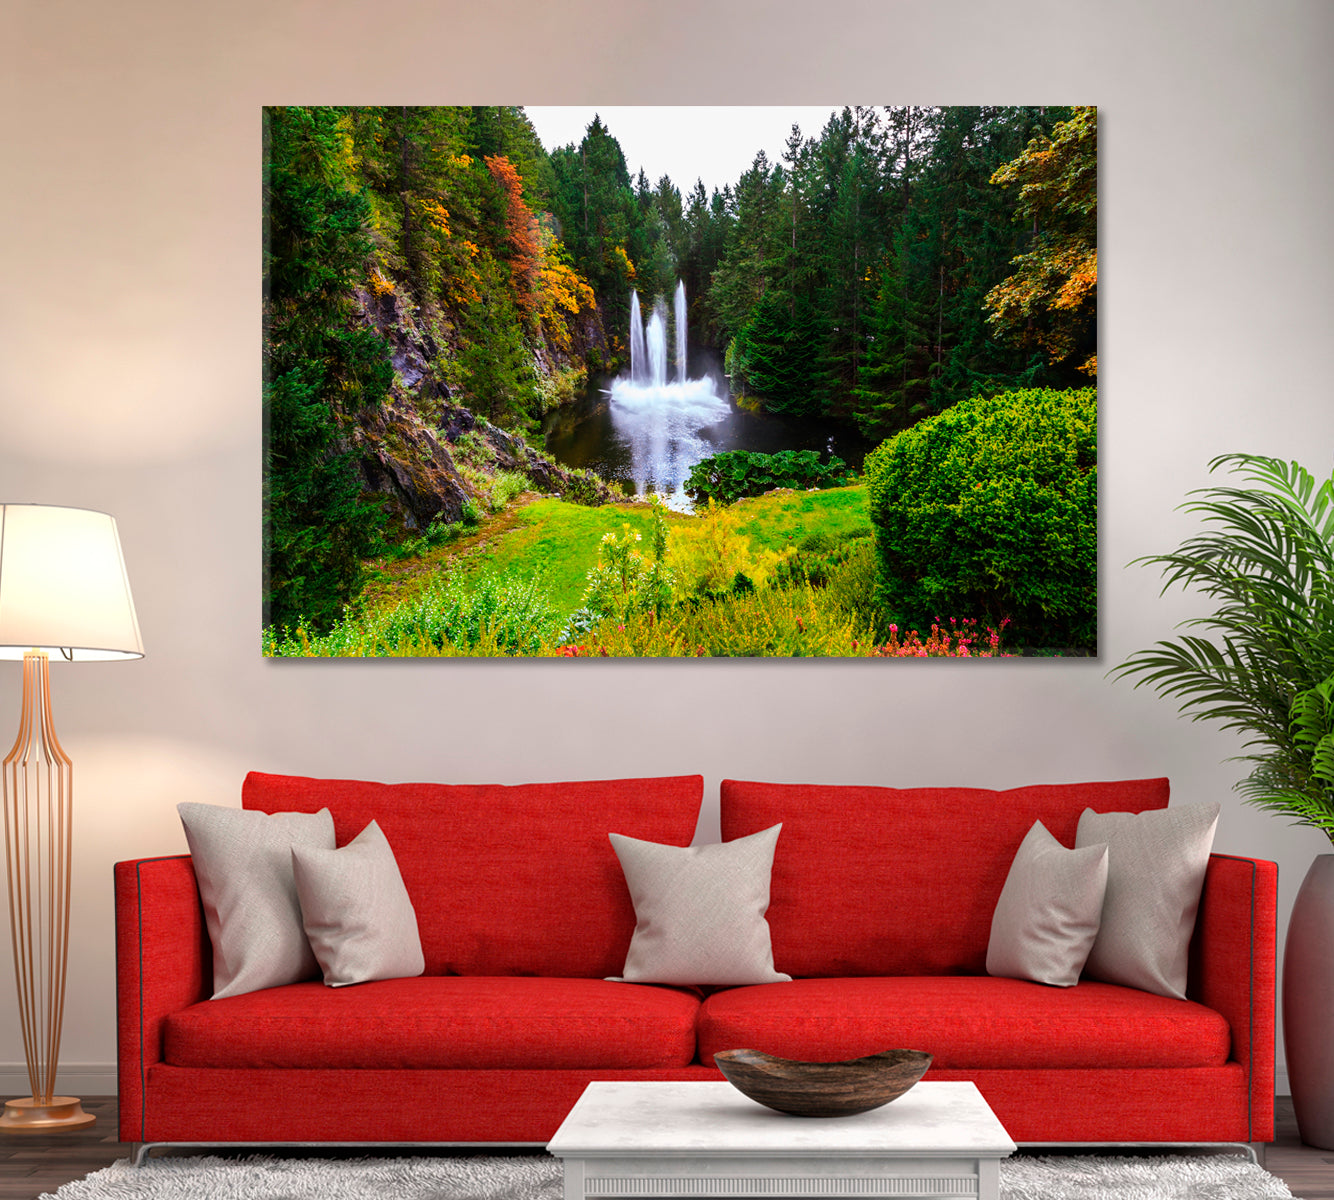 Butchart Gardens on Vancouver Island Canada Canvas Print ArtLexy 1 Panel 24"x16" inches 